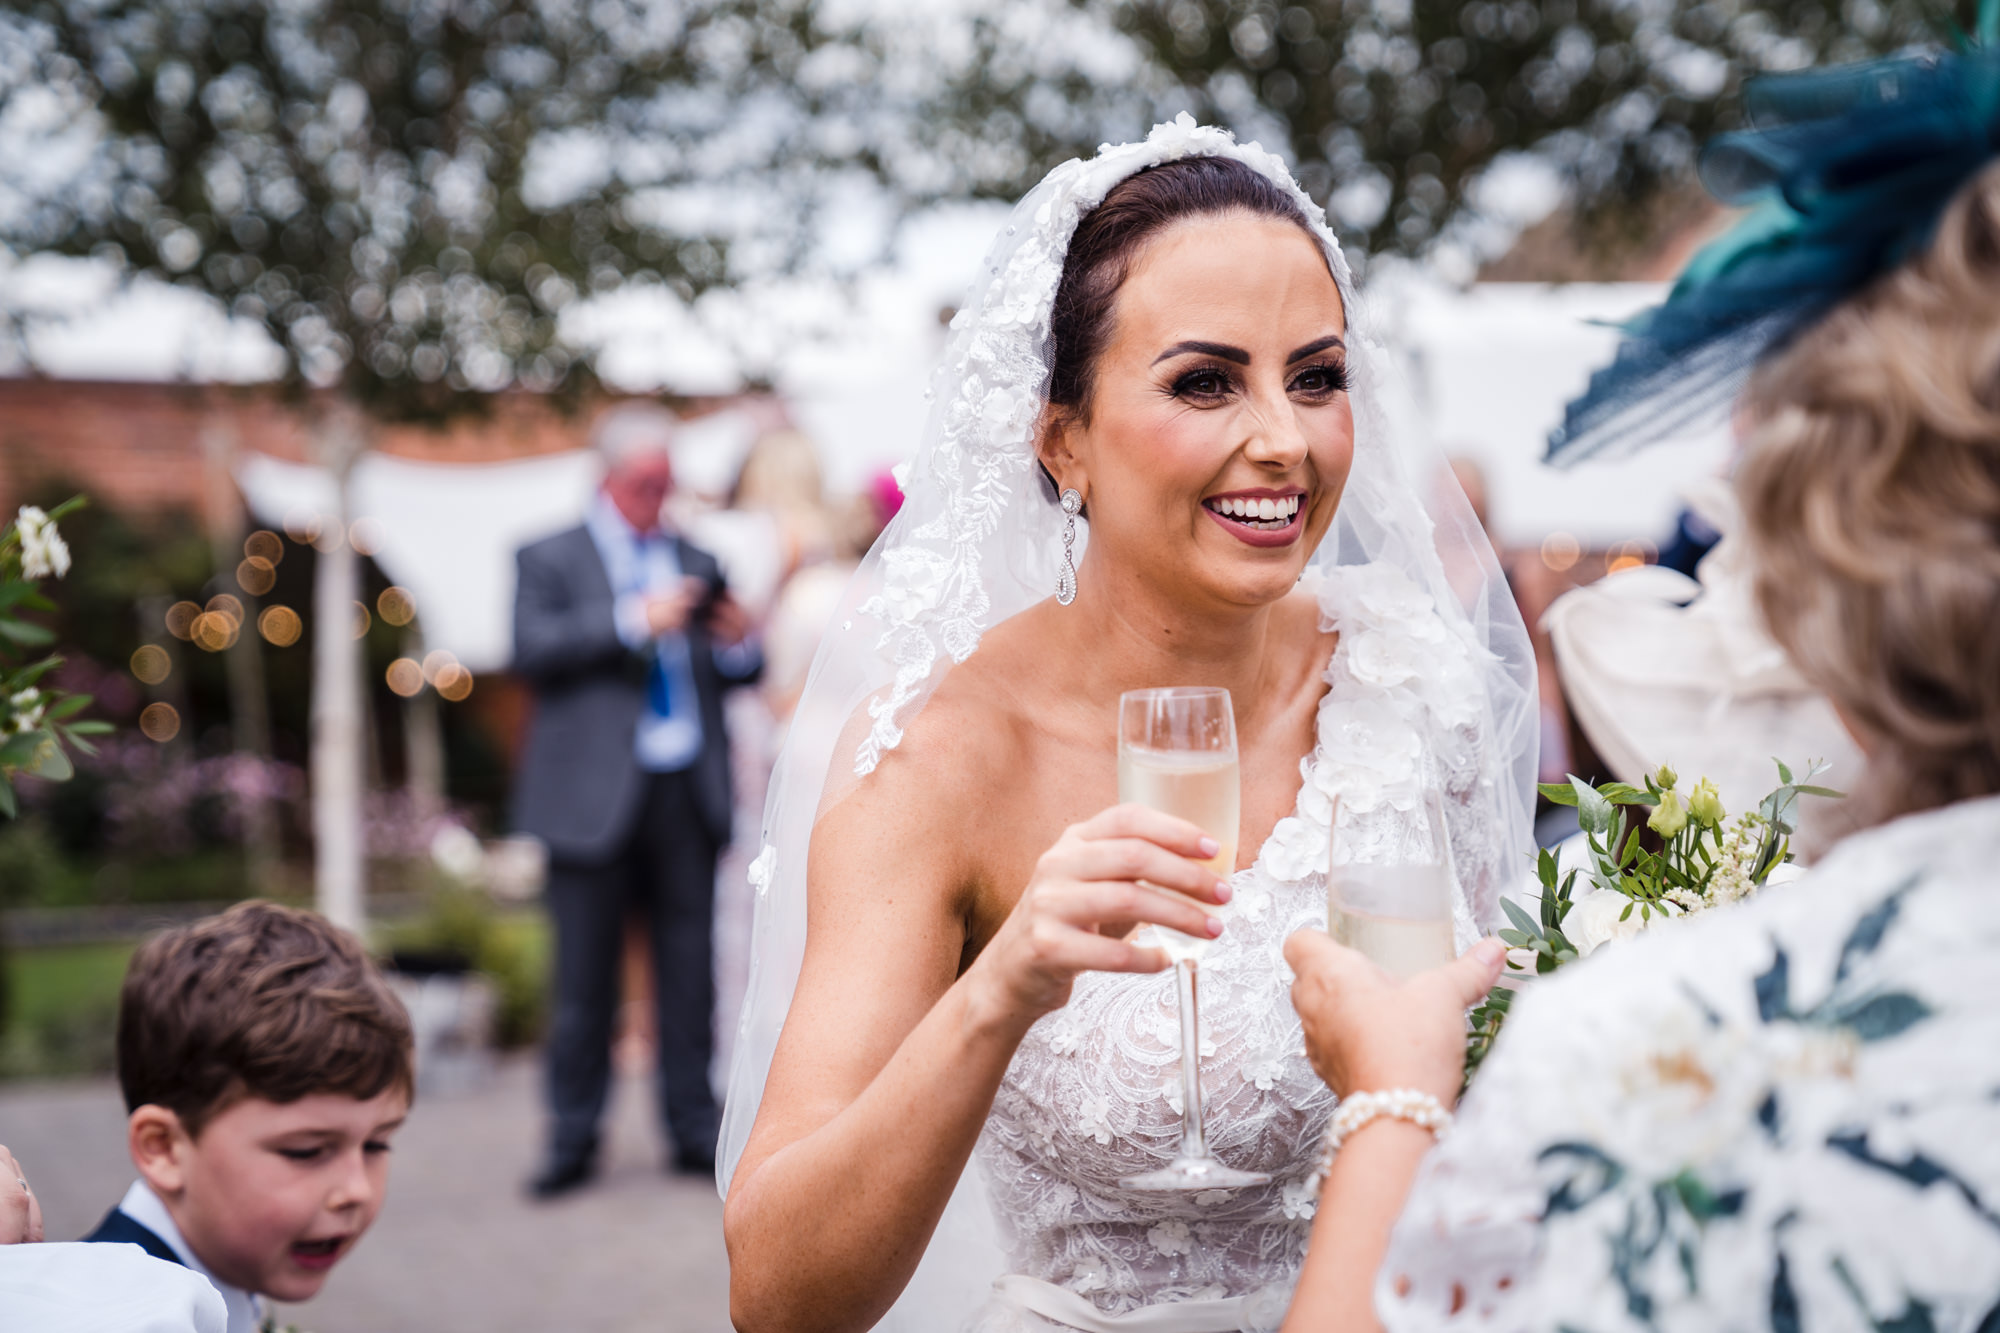 bride dressed in white holding a glass of champagne and smiling with a wedding guest